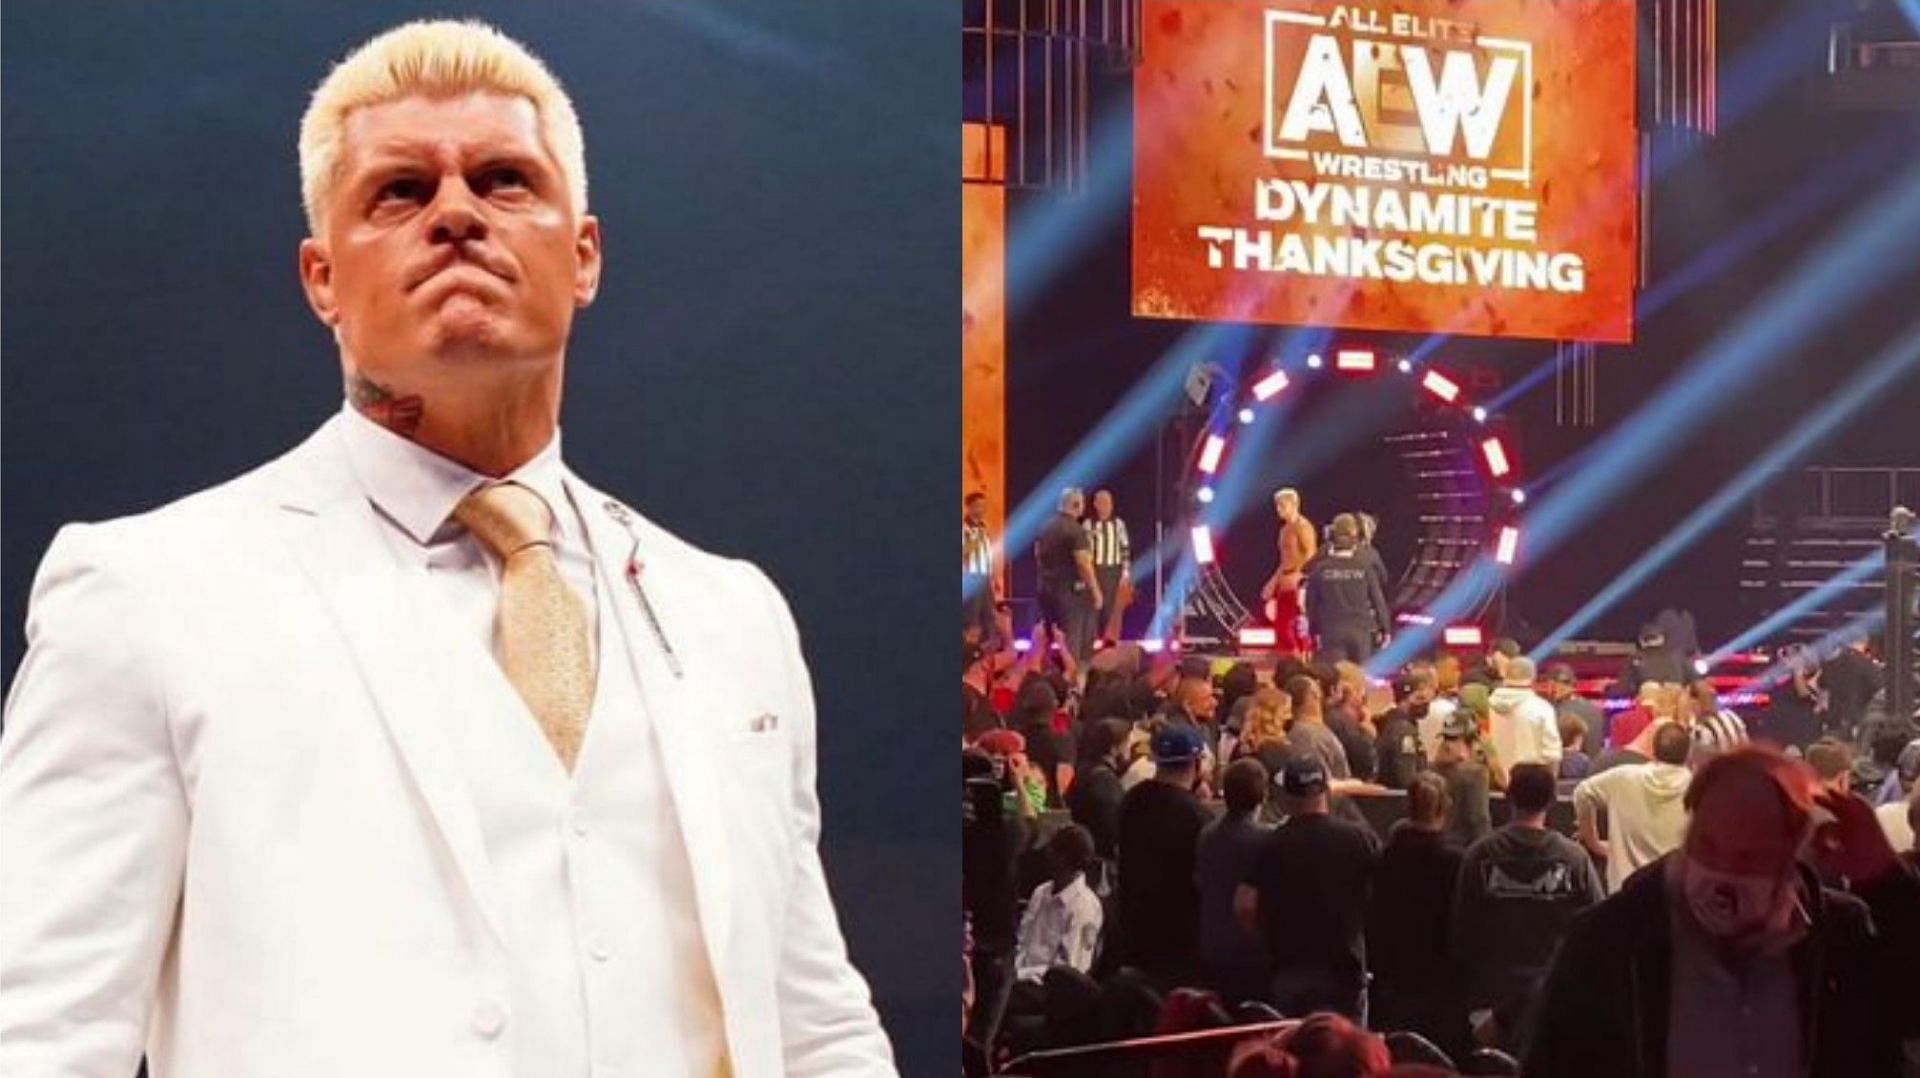 Cody Rhodes had a tough outing on AEW Dynamite this week!